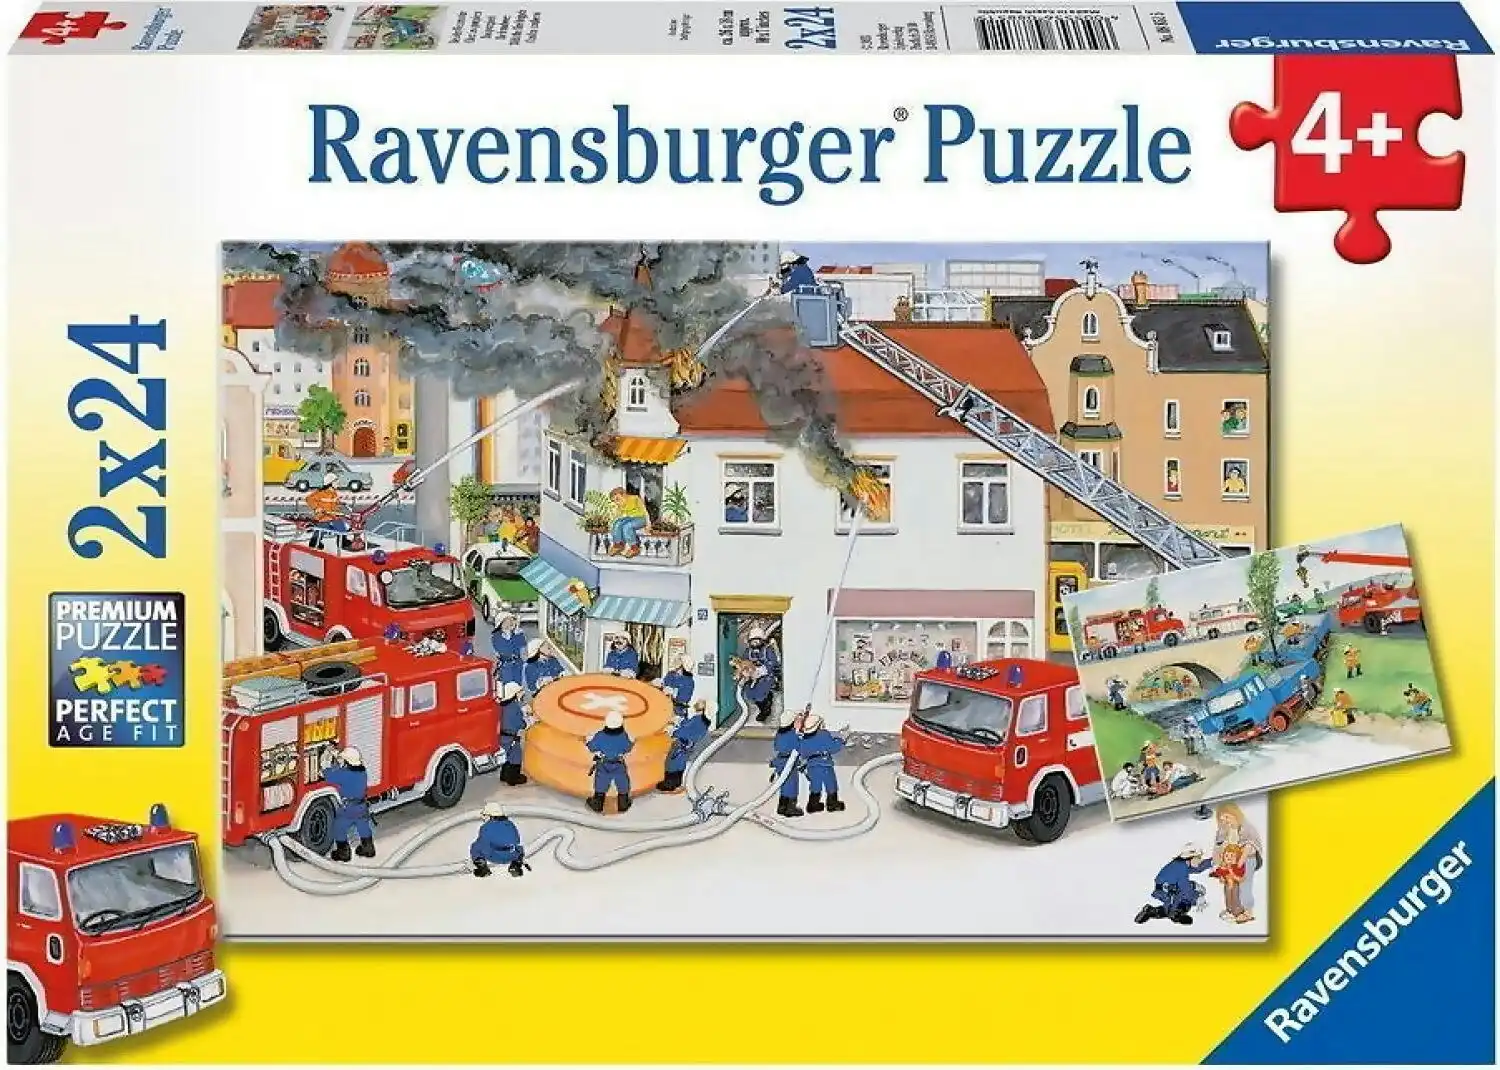 Ravensburger - Busy Fire Brigade Jigsaw Puzzle 2x24 Pieces